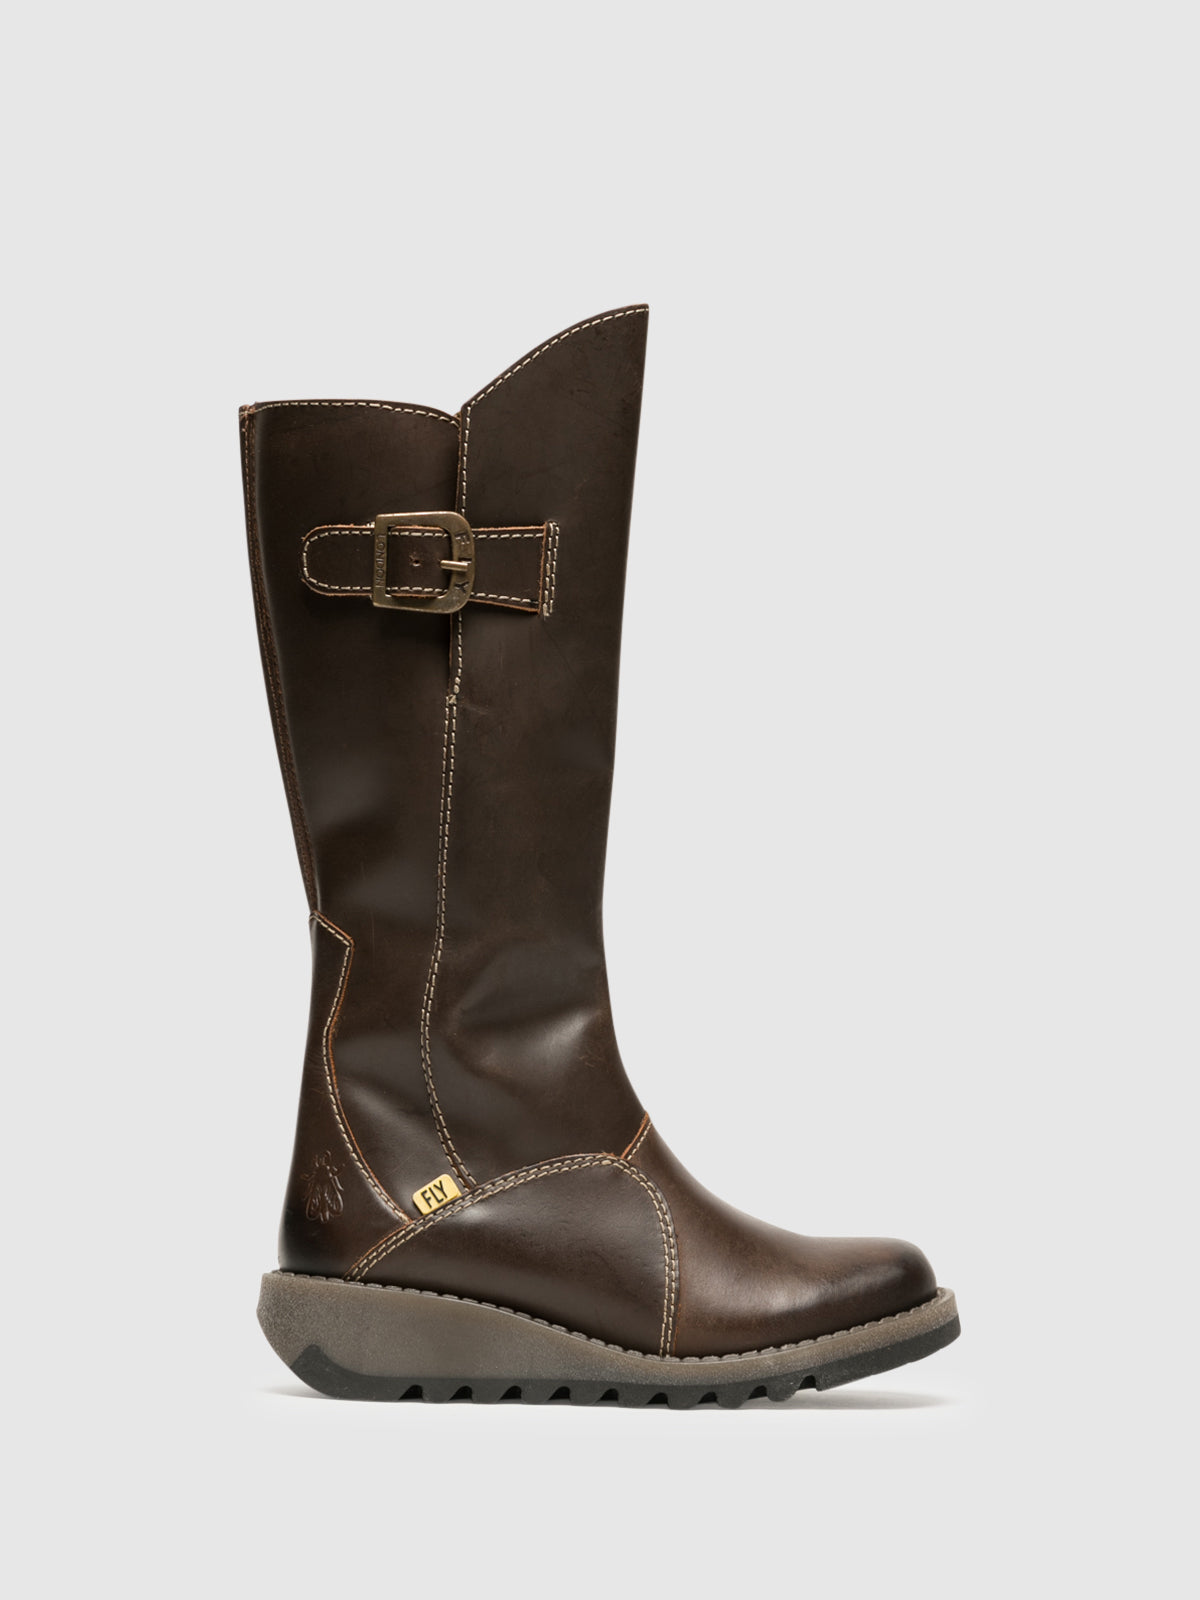 Fly London Brown Buckle Boots